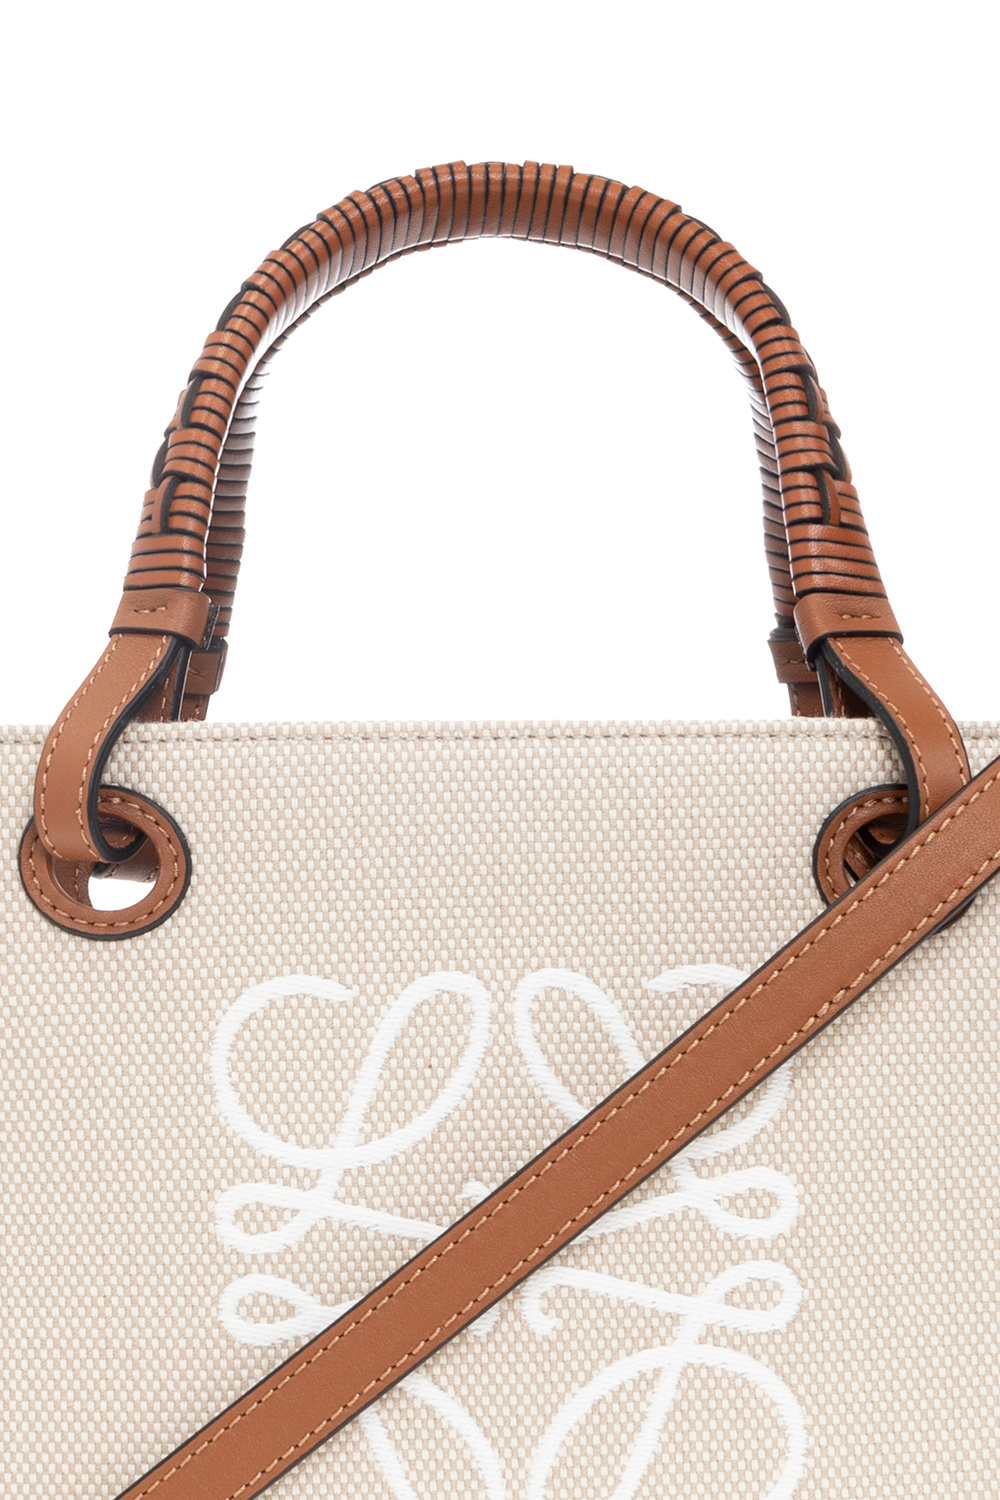 LOEWE - The Anagram Tote bag in black canvas and rosemary